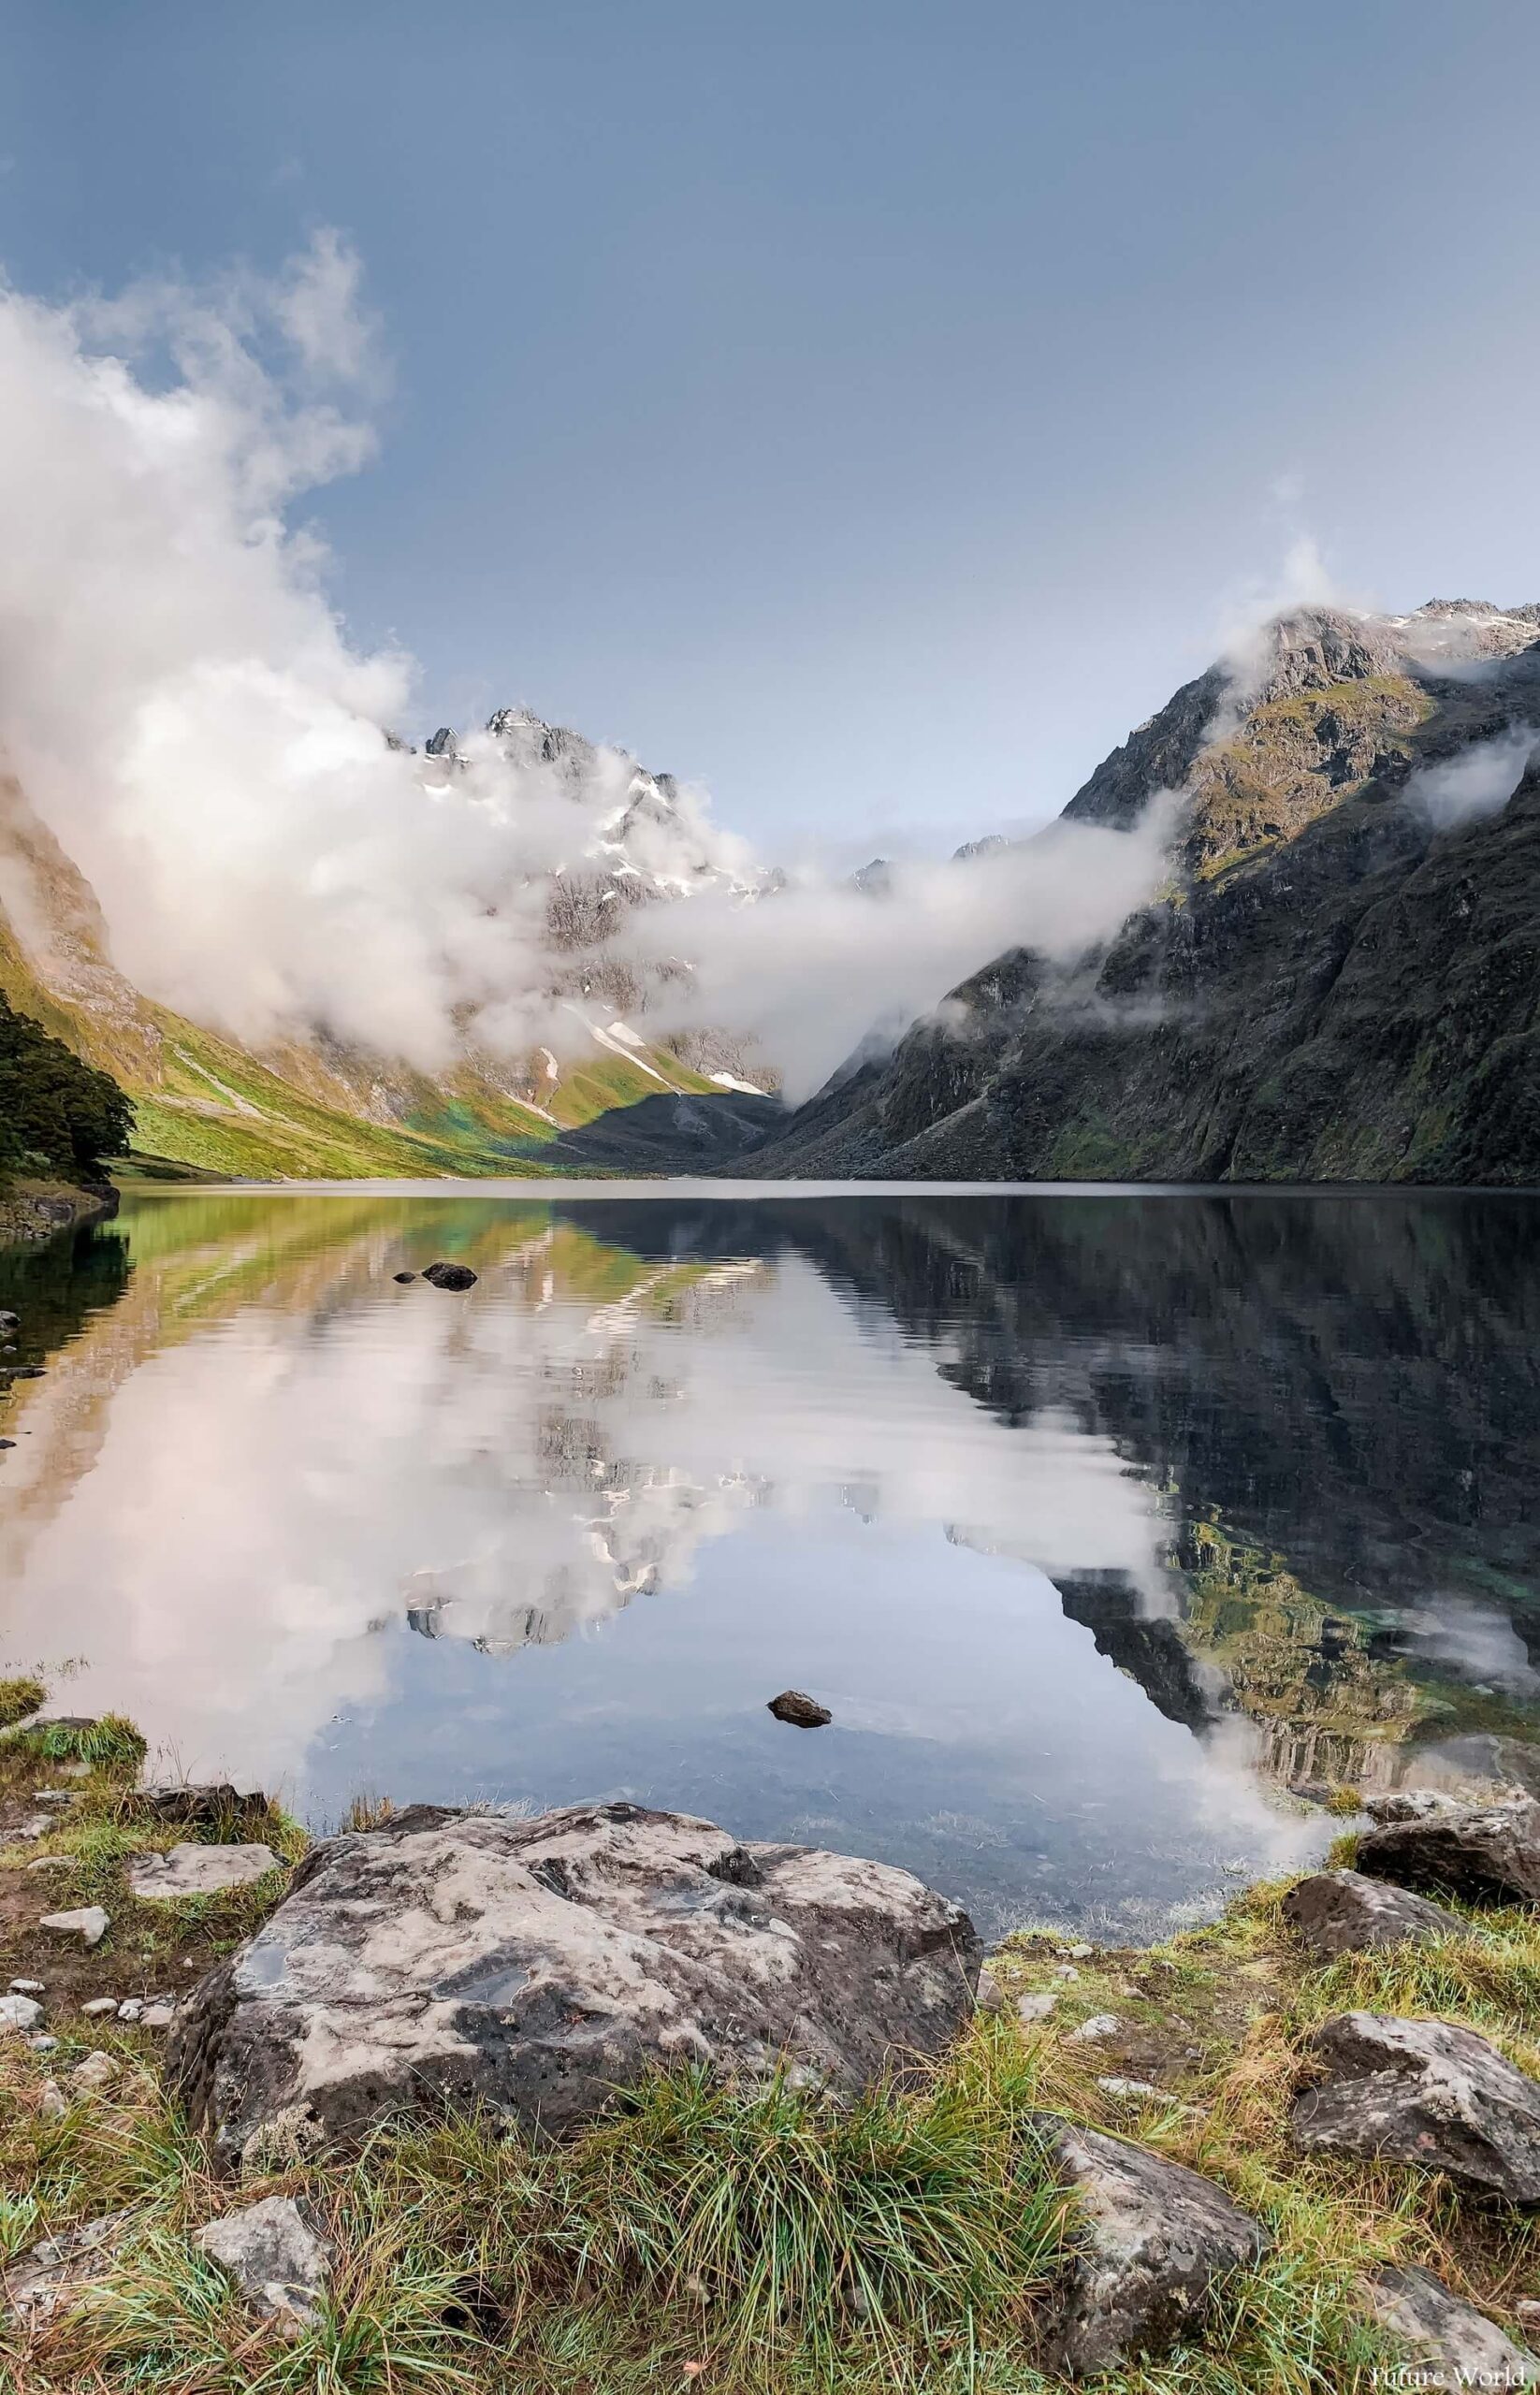 Hidden Gems to discover in Lake Marian, Fiordland National Park